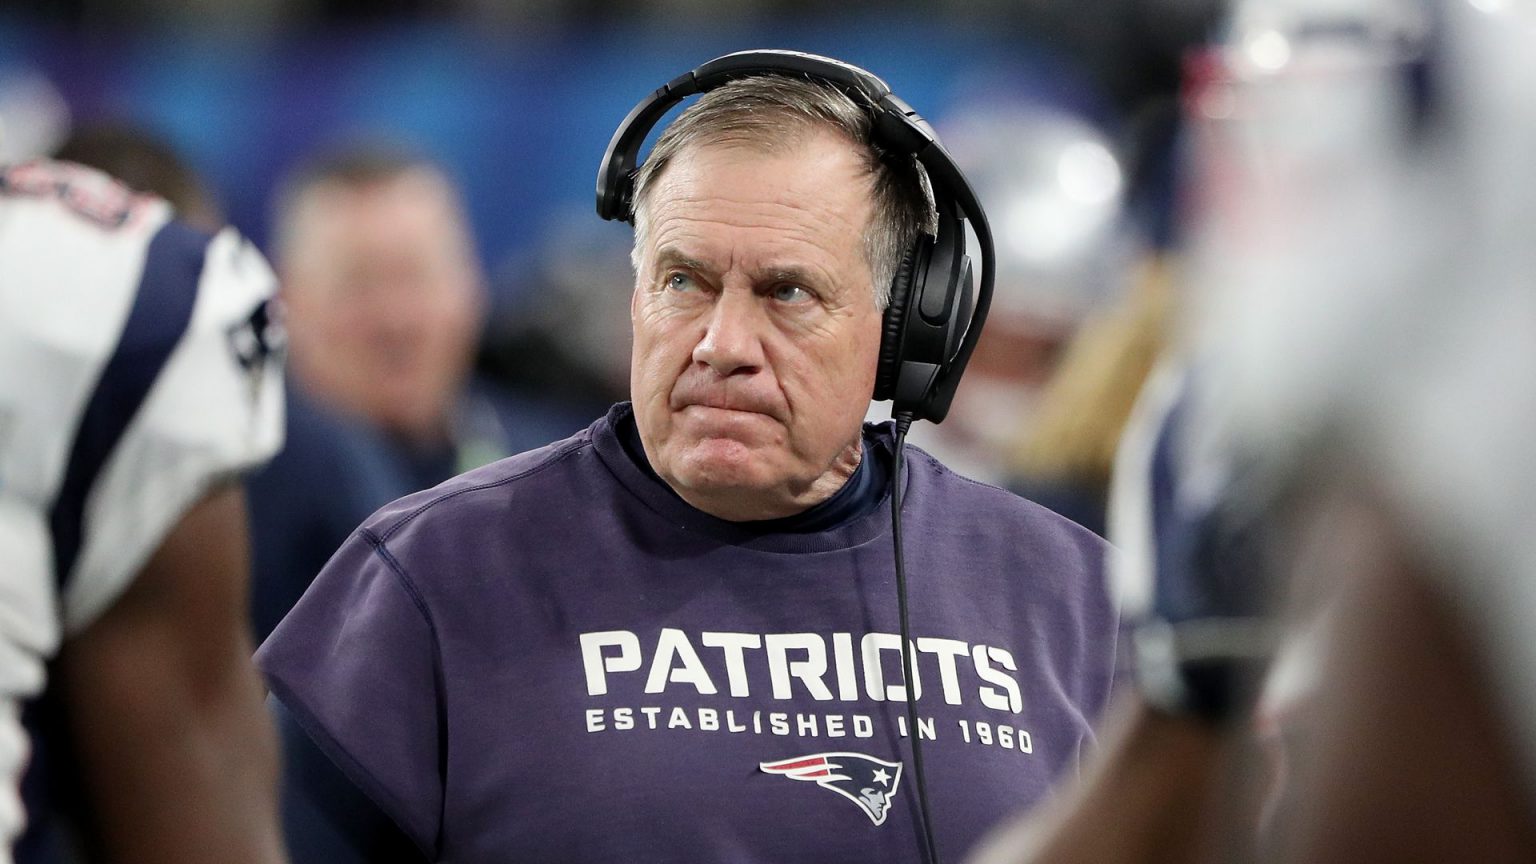 Who's coach Bill Belichick? How old is his wife? Bio Salary, Net Worth